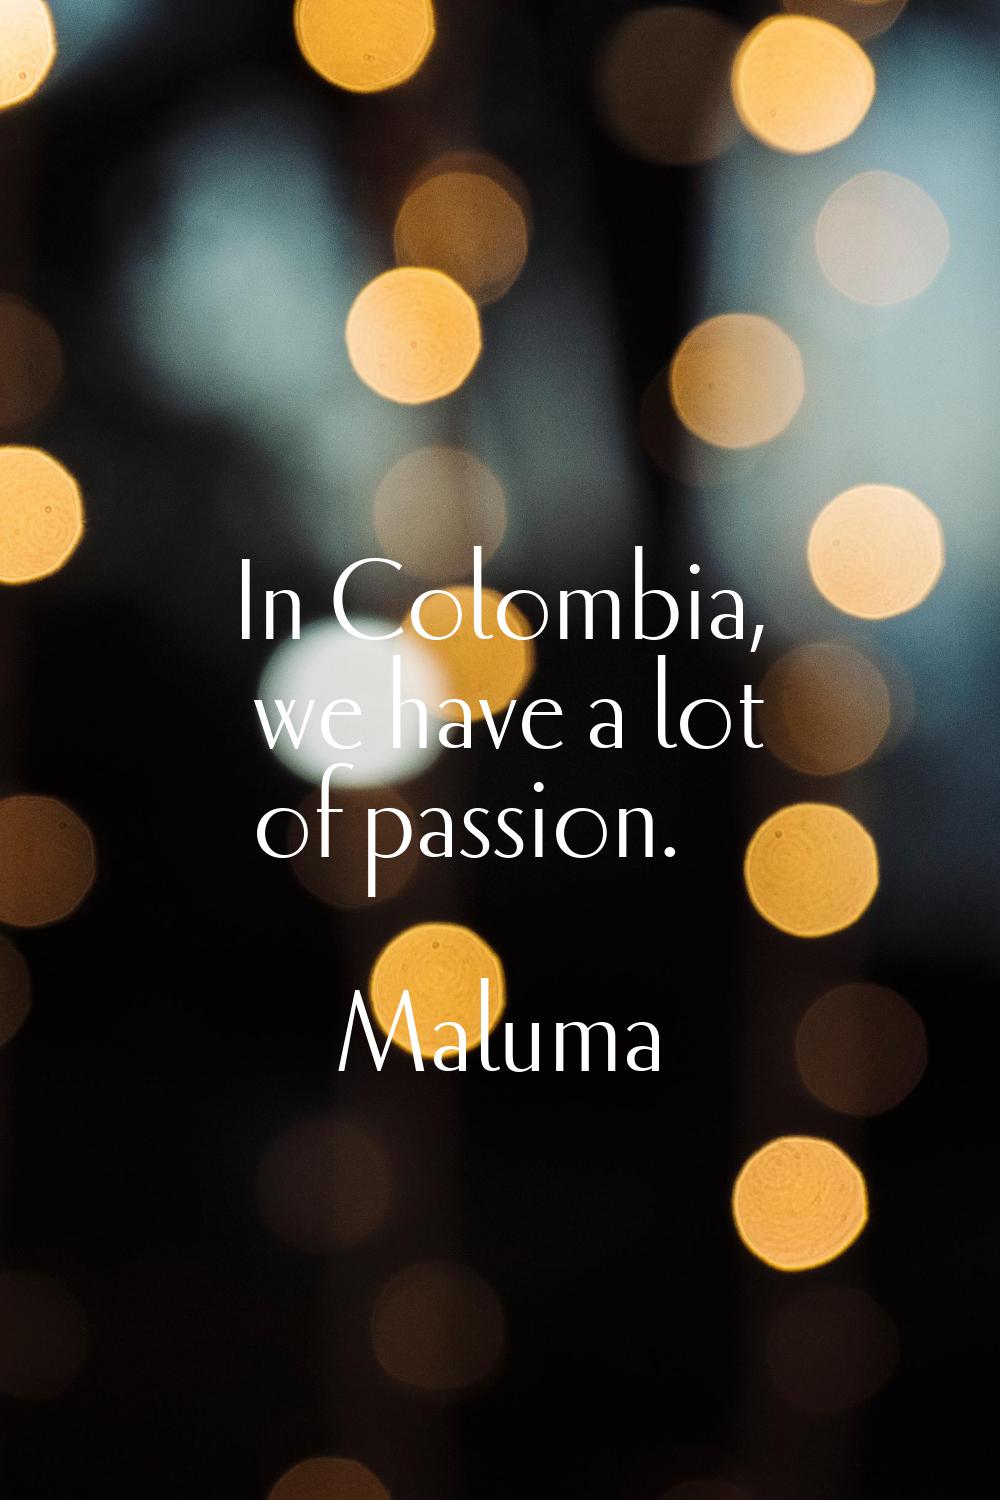 In Colombia, we have a lot of passion.